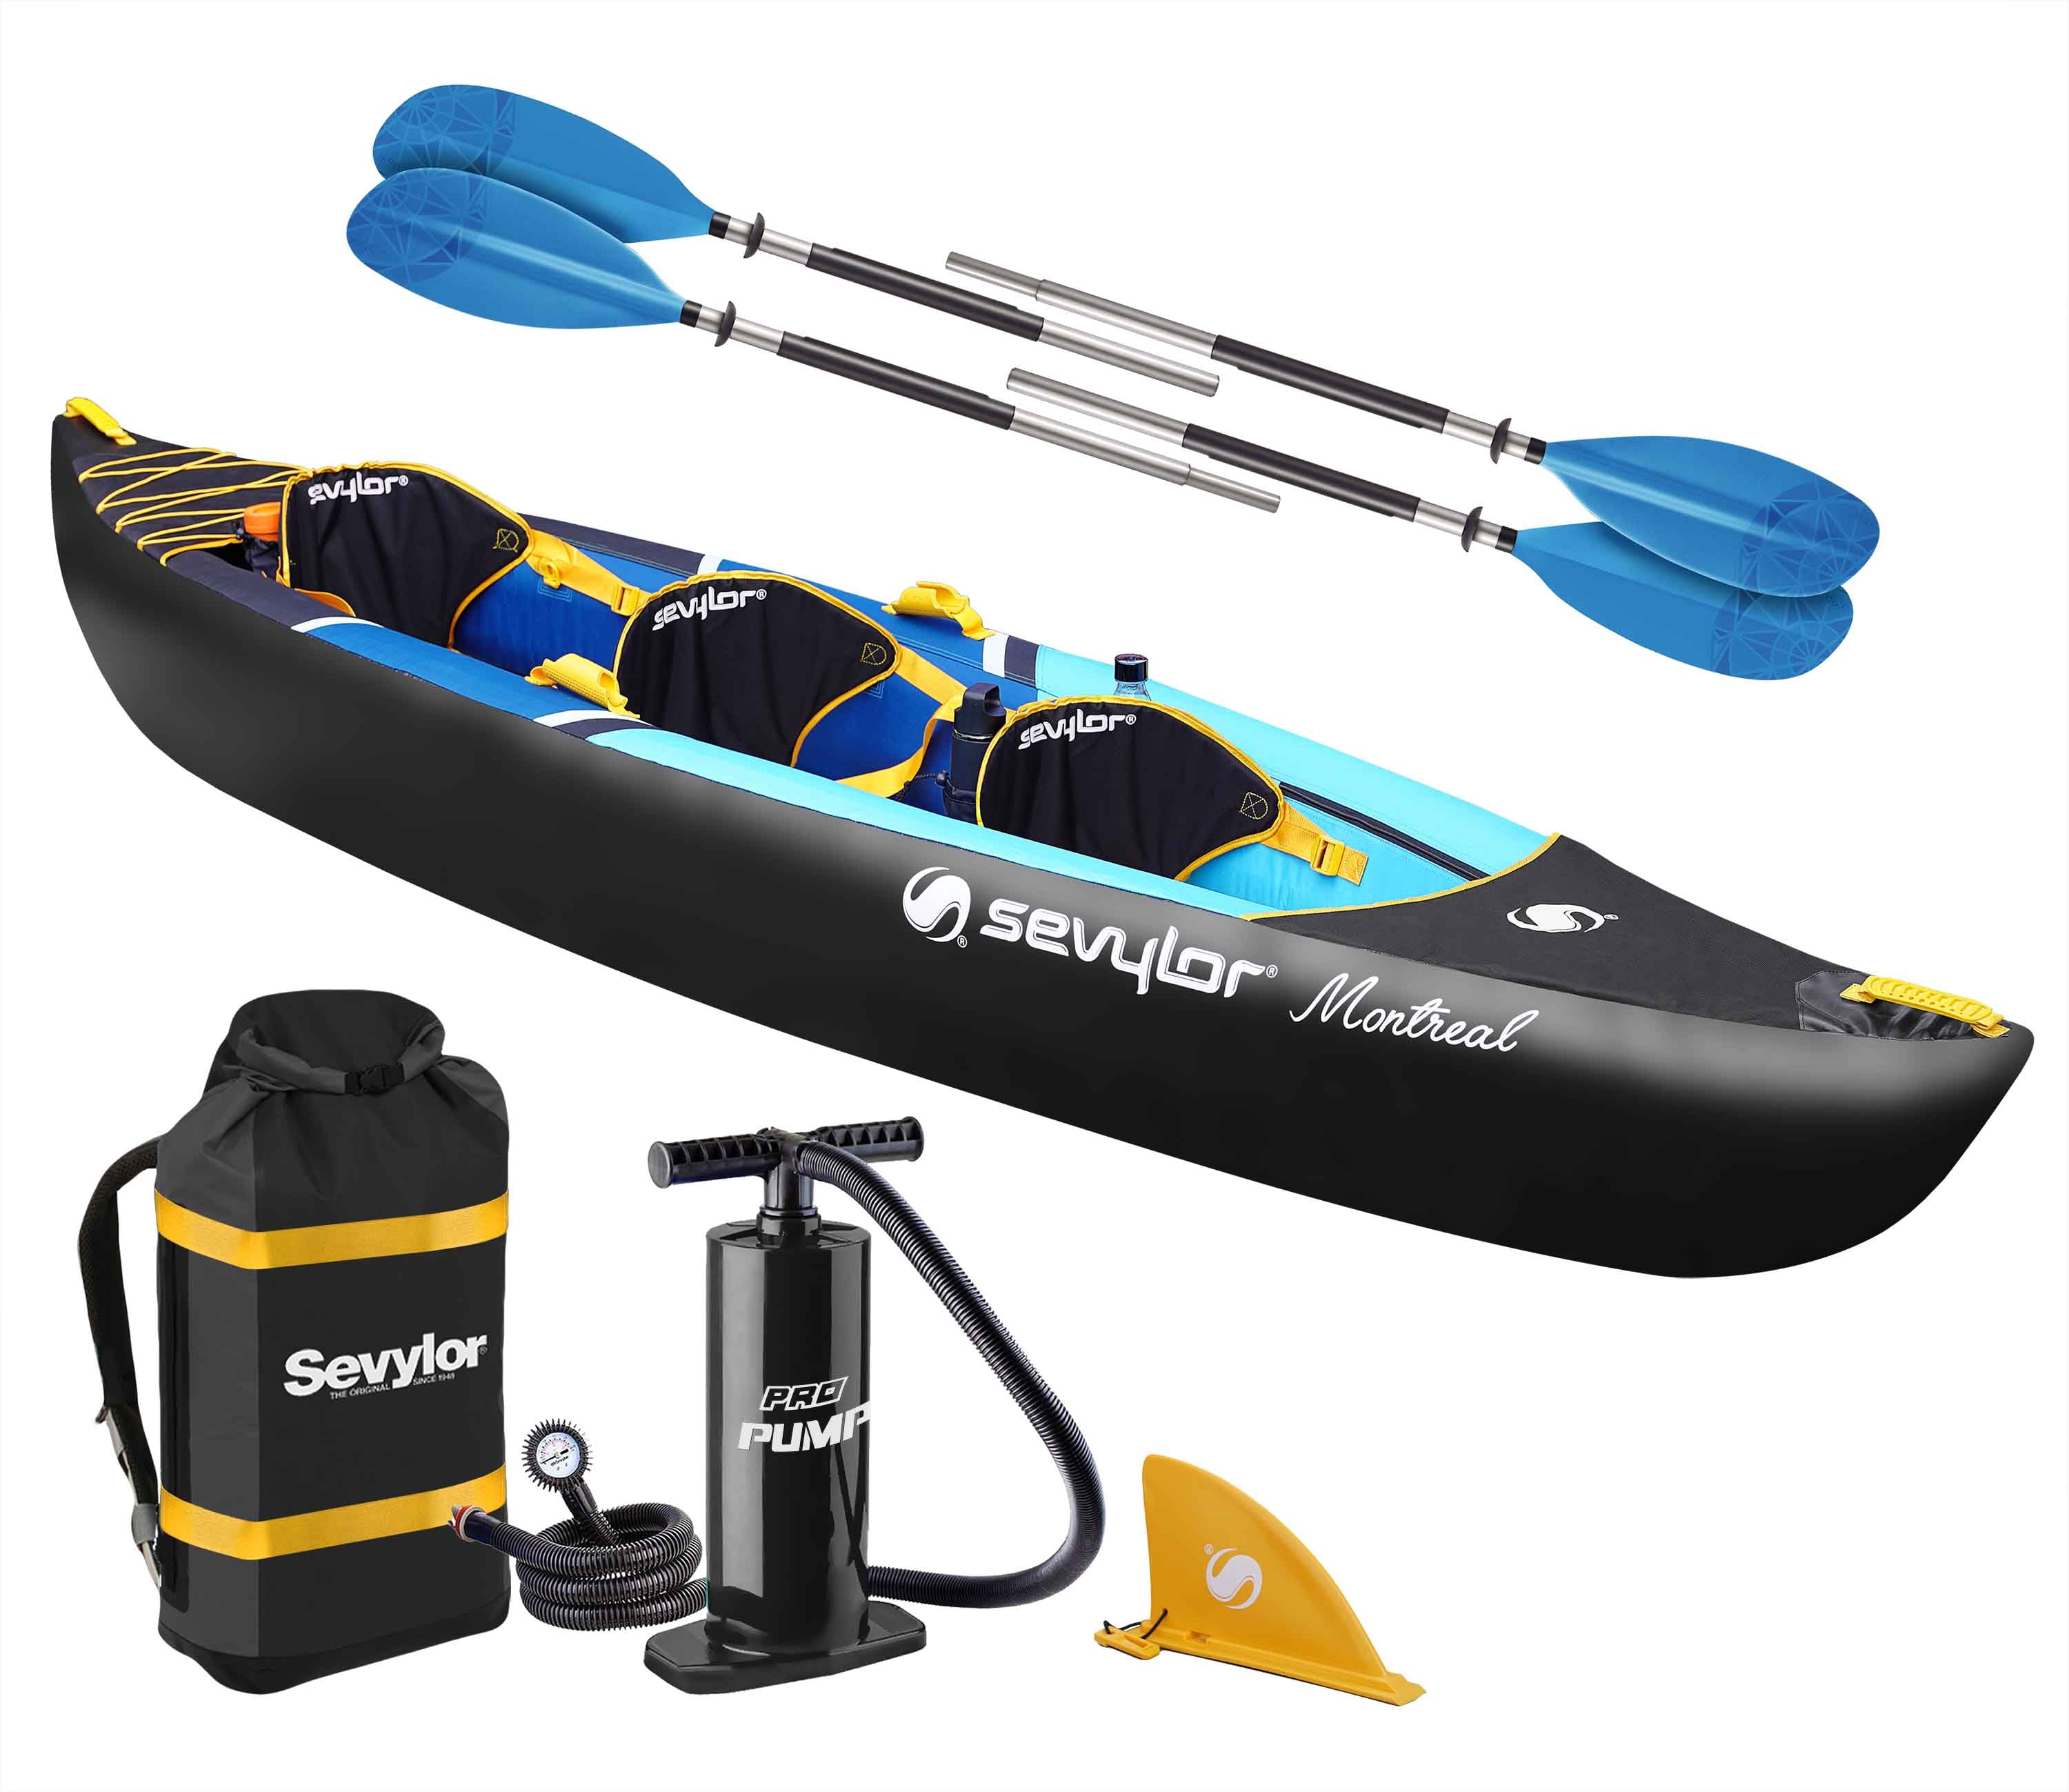 Inflatable Kayak With Paddle Pump With Stow Bag Persons, 43% OFF